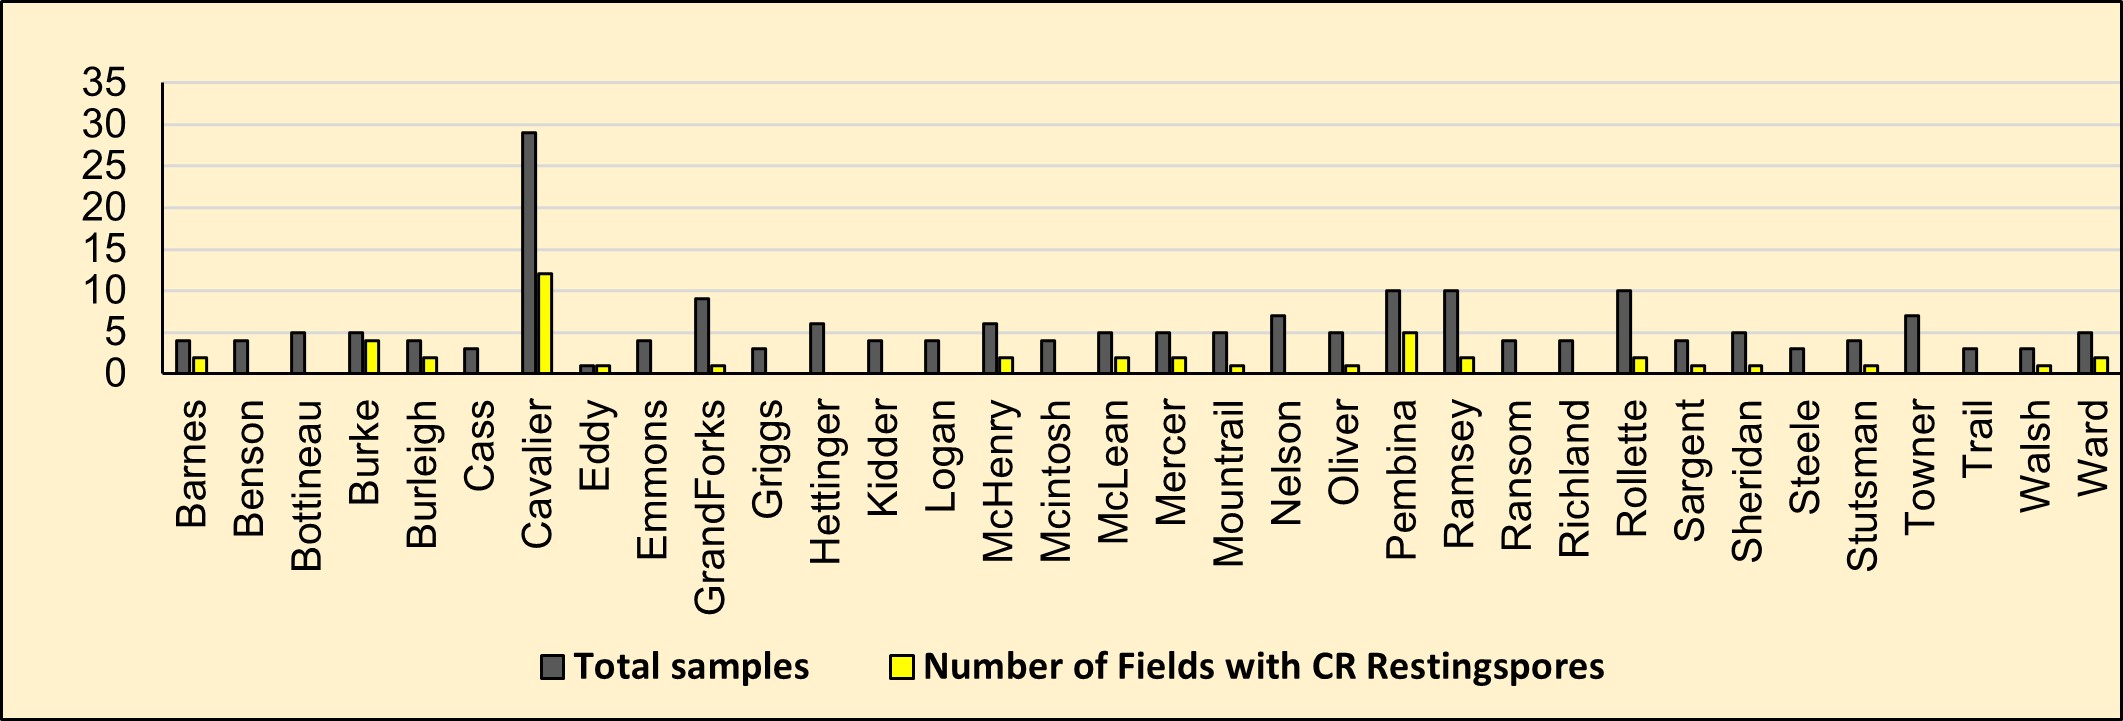 Number of fields with P. brassicae spores found in soil samples collected from various counties in North Dakota through molecular assays. 